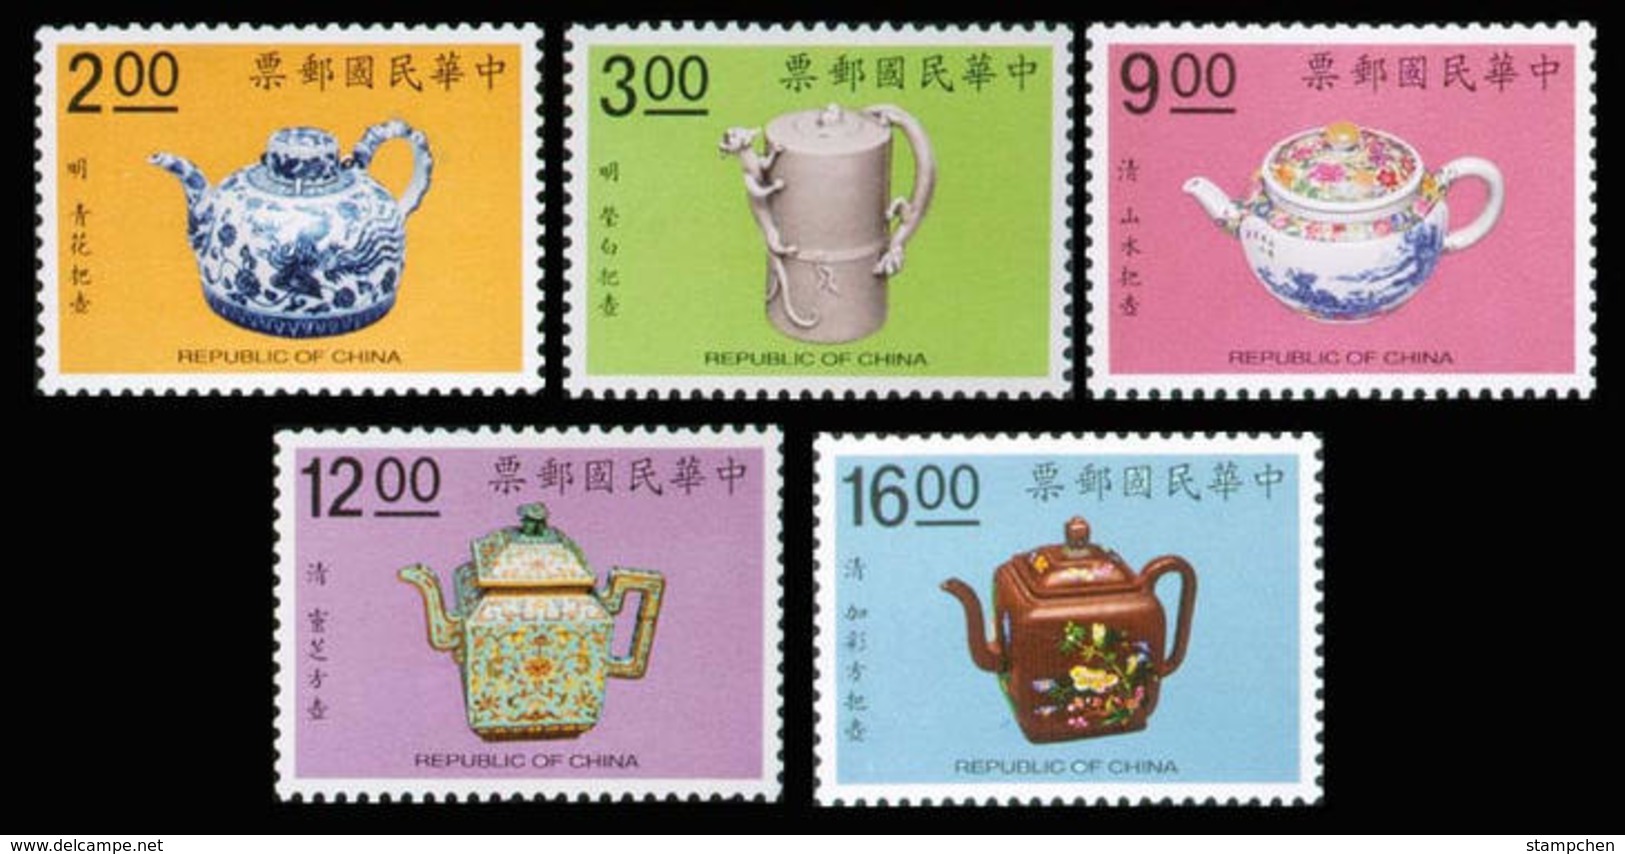 1991 Ancient Chinese Art Treasures Stamps - Teapot Flower Medicine - Museums